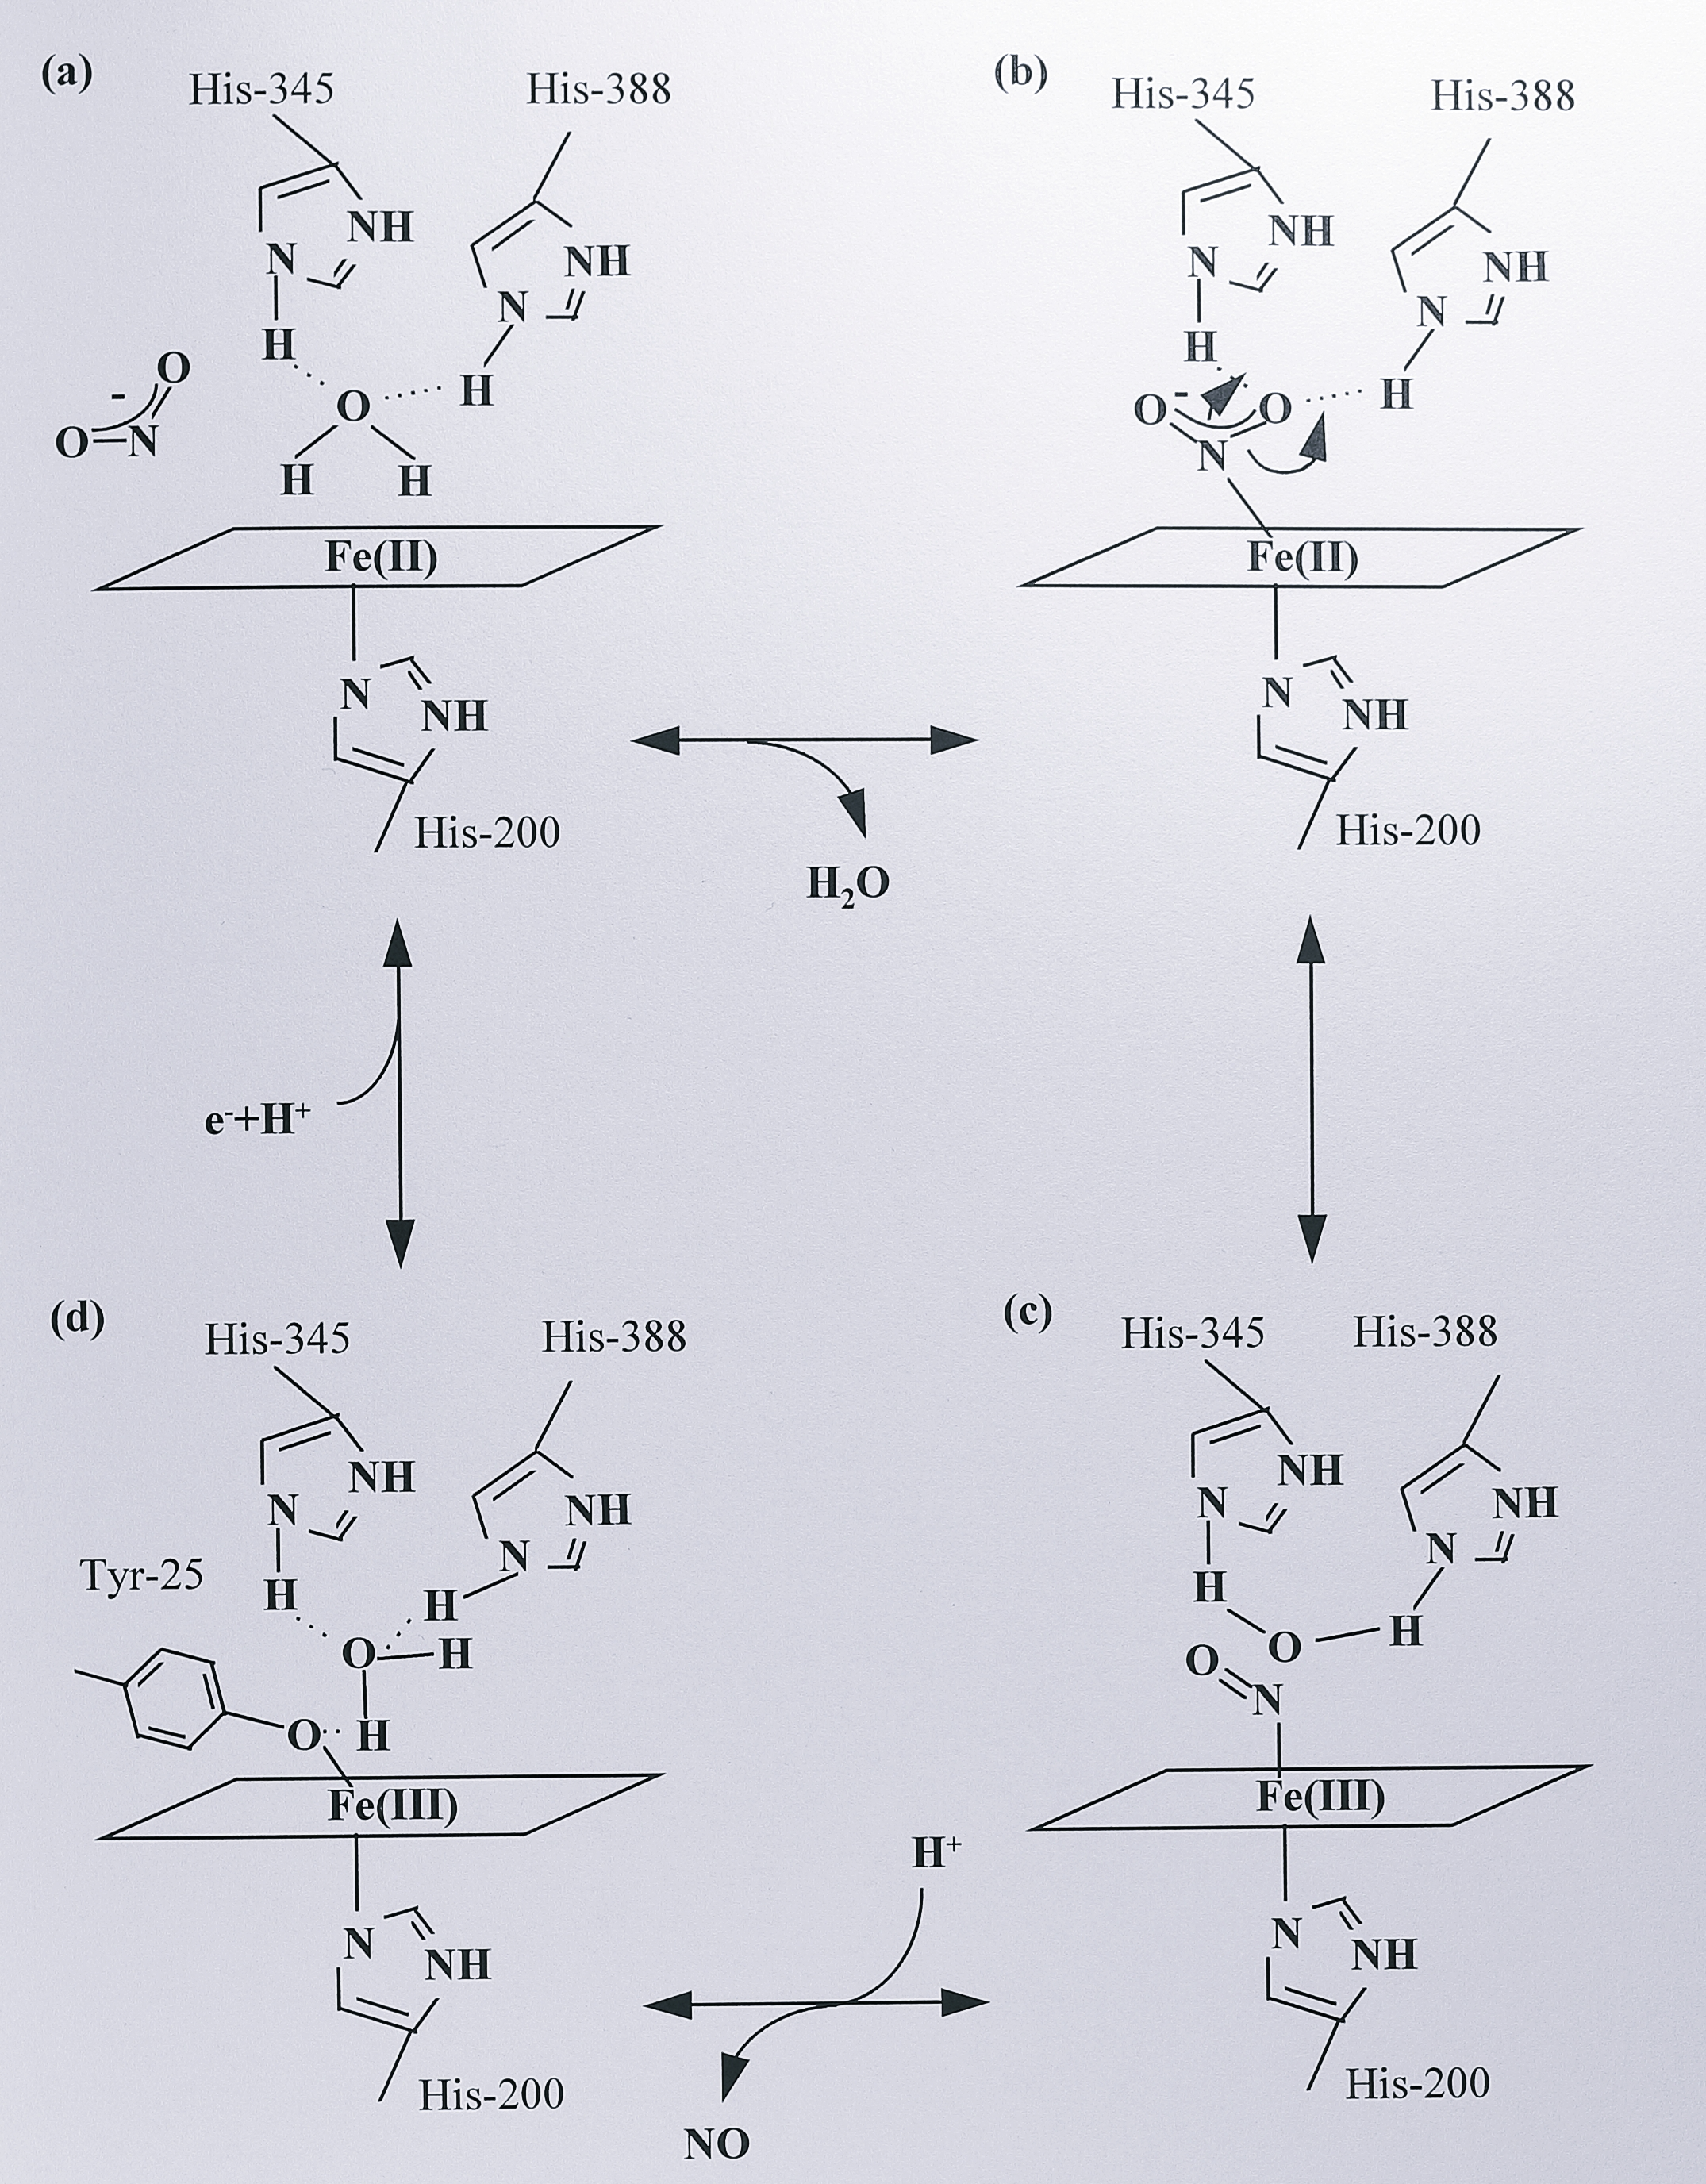 Proposed mechanism for nitrite reduction by cytochrome _cd_$_1$ from _Thiosphaera pantotropha_ (Fülöp _et al_., 1995 [@fulop_anatomy_1995]). (a) Nitrite binds at the reduced _d_$_1$ haem which is pentacoordinate, displacing a water molecule. (b) His-345 and His-388 act as proton donors, allowing the abstraction of an oxygen atom from bound nitrite. (c) This leaves nitric oxide bound at the oxidised _d_$_1$ haem. (d) Bound NO is then displaced by replacement with Tyr-25. The _d_$_1$ haem is re-reduced by an electron from the _c_-haem, displacing Tyr-25 and allowing the cycle to begin again.